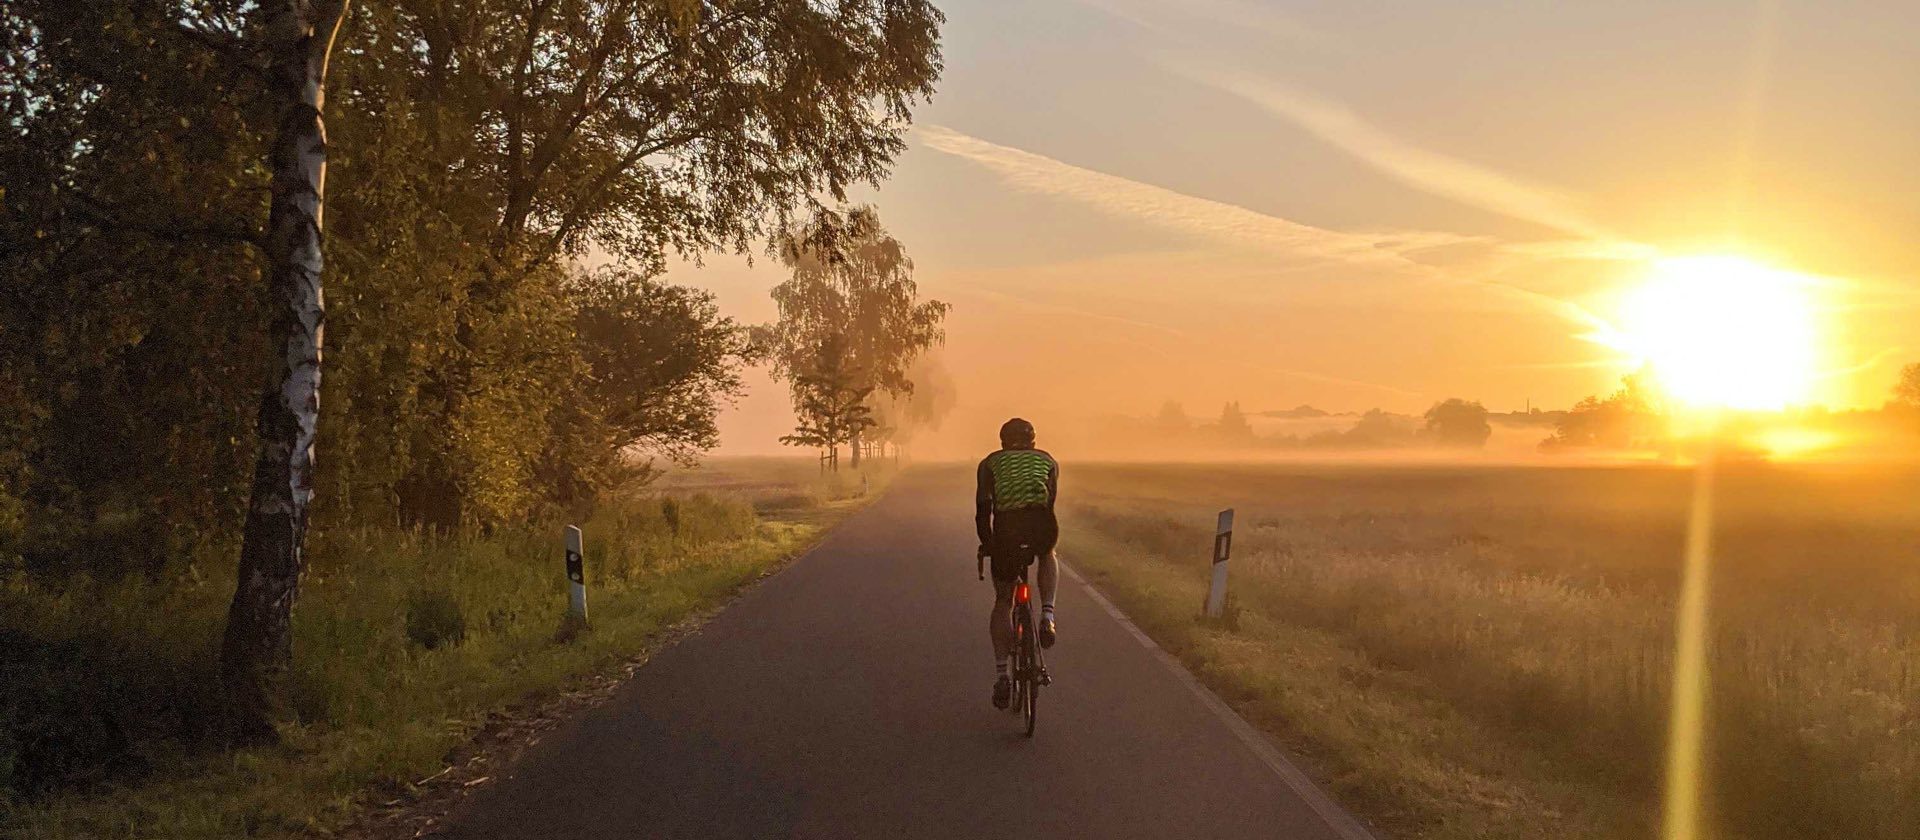 Frank Bültge rides on his bike into the sunset